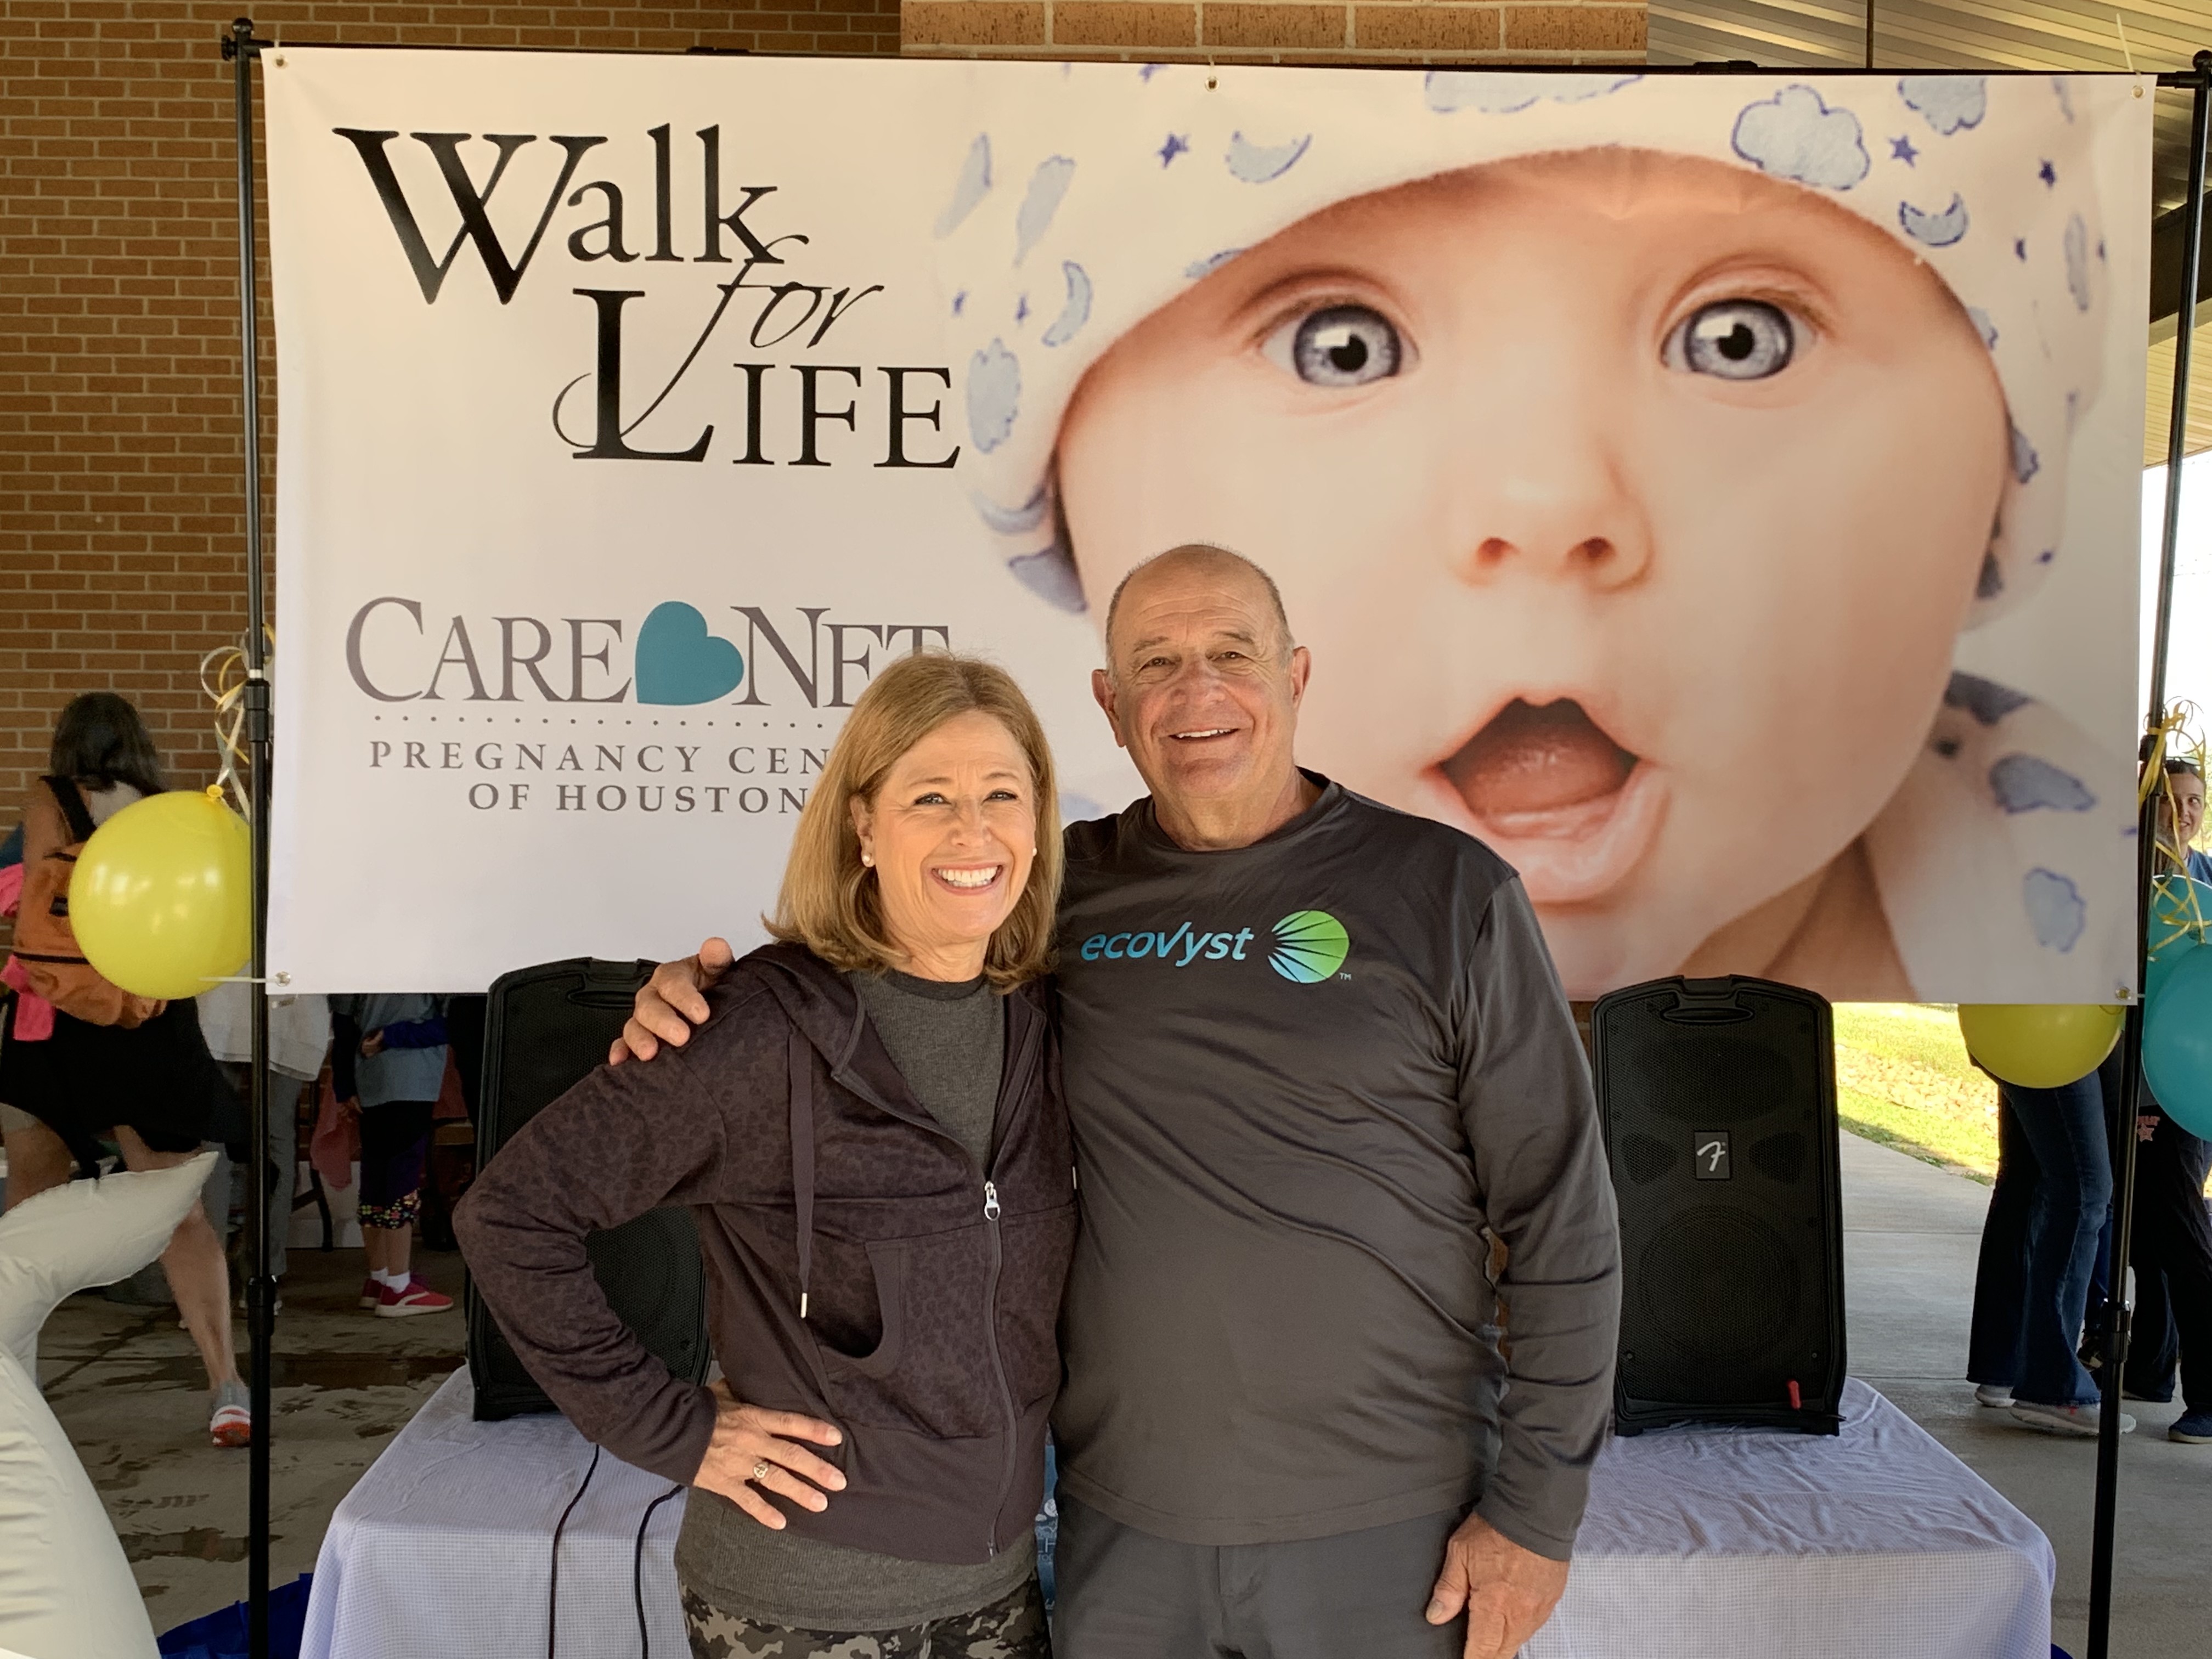 Excited to be part of the Walk for Life